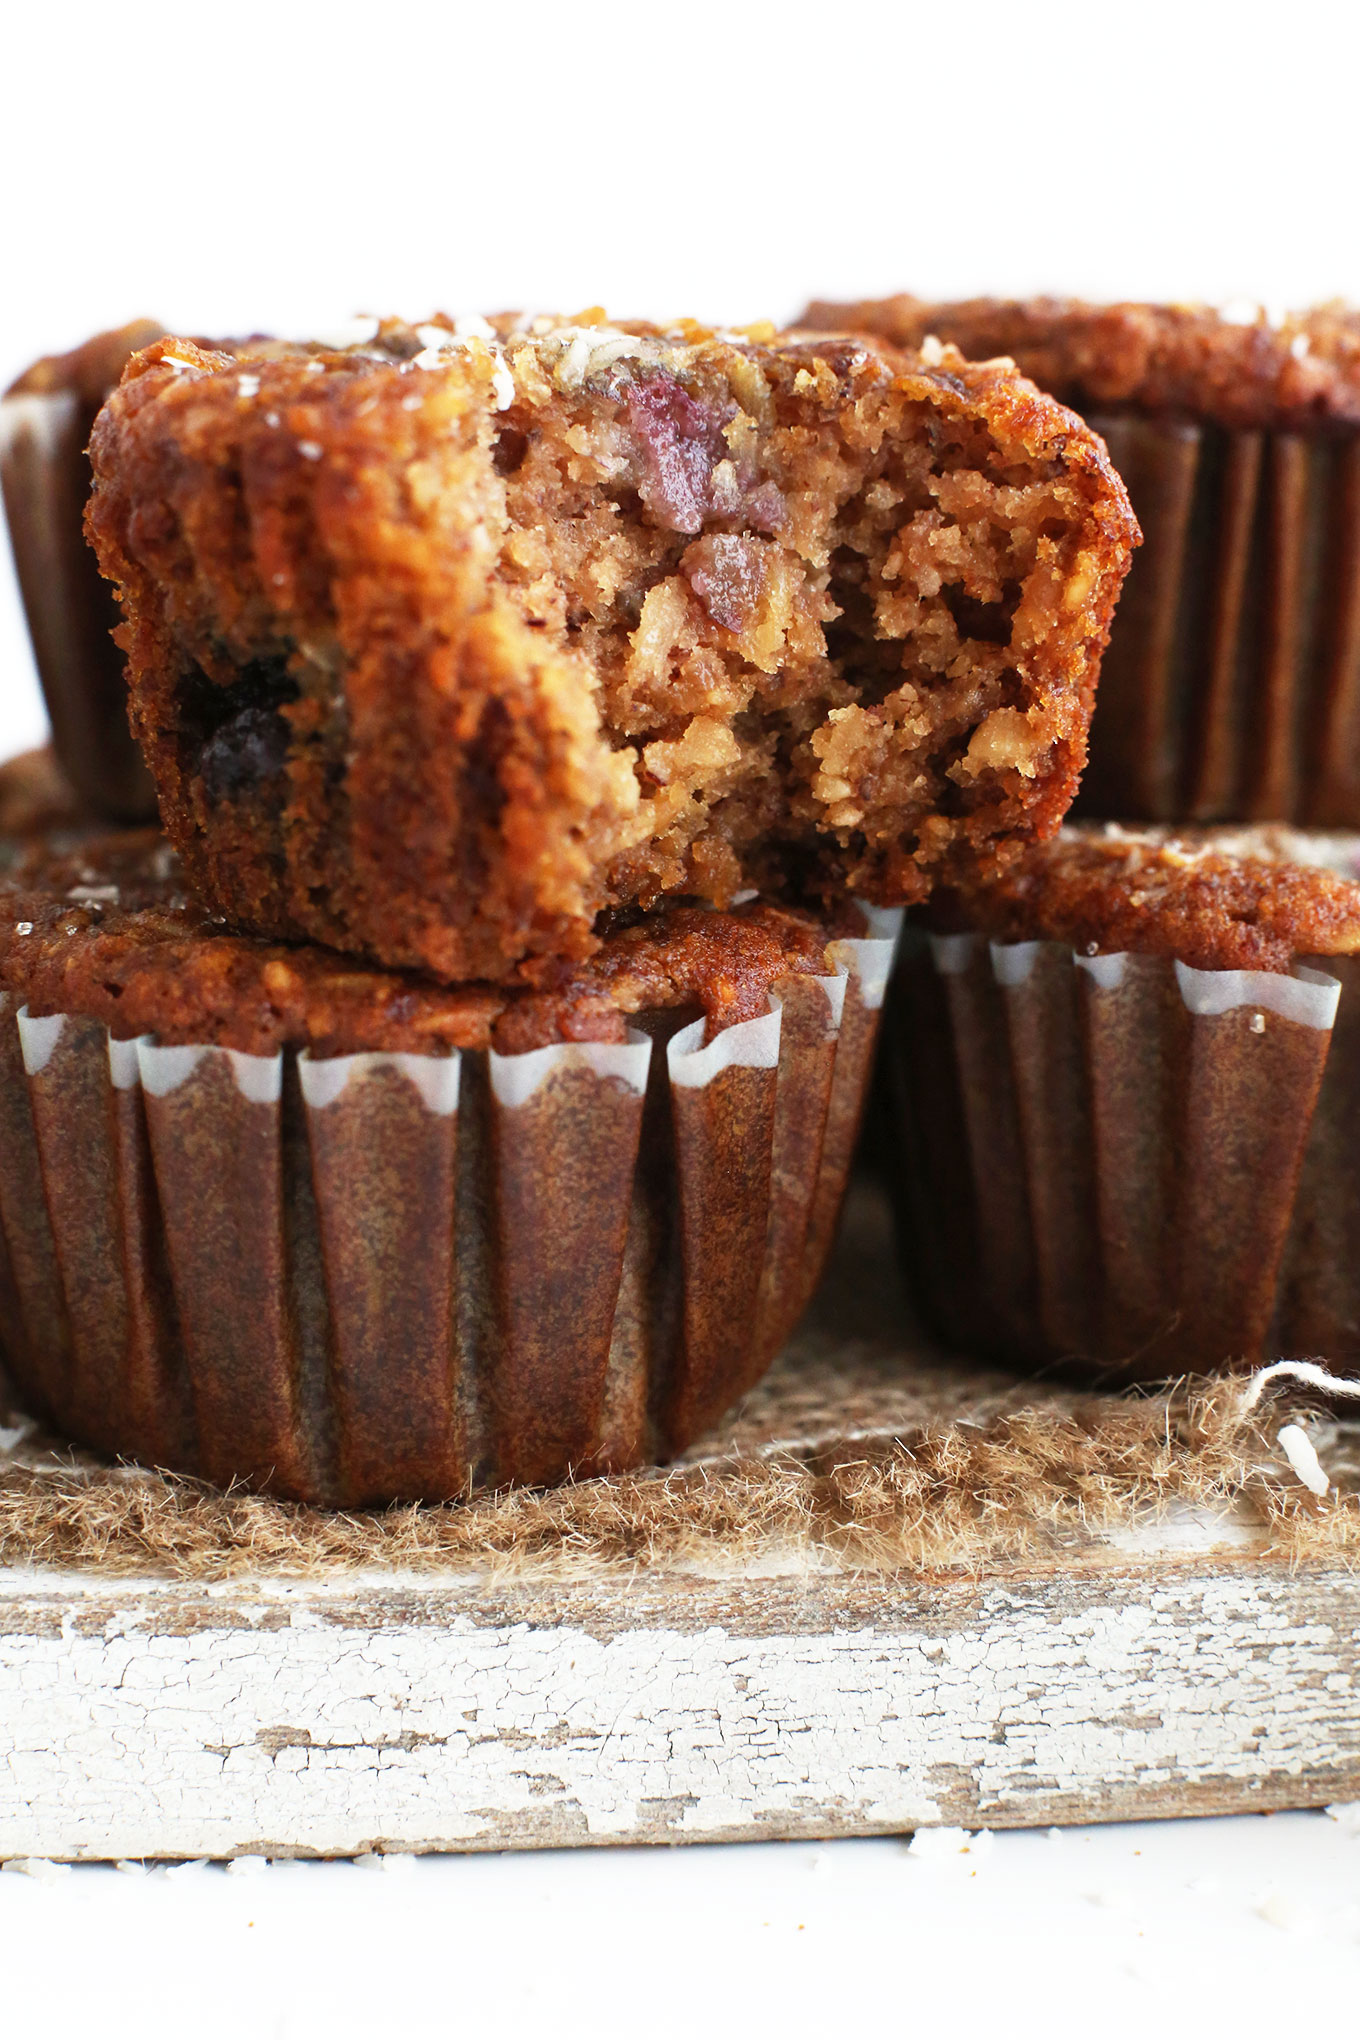 Gluten-free Vegan Berry Coconut Muffins made with wholesome ingredients